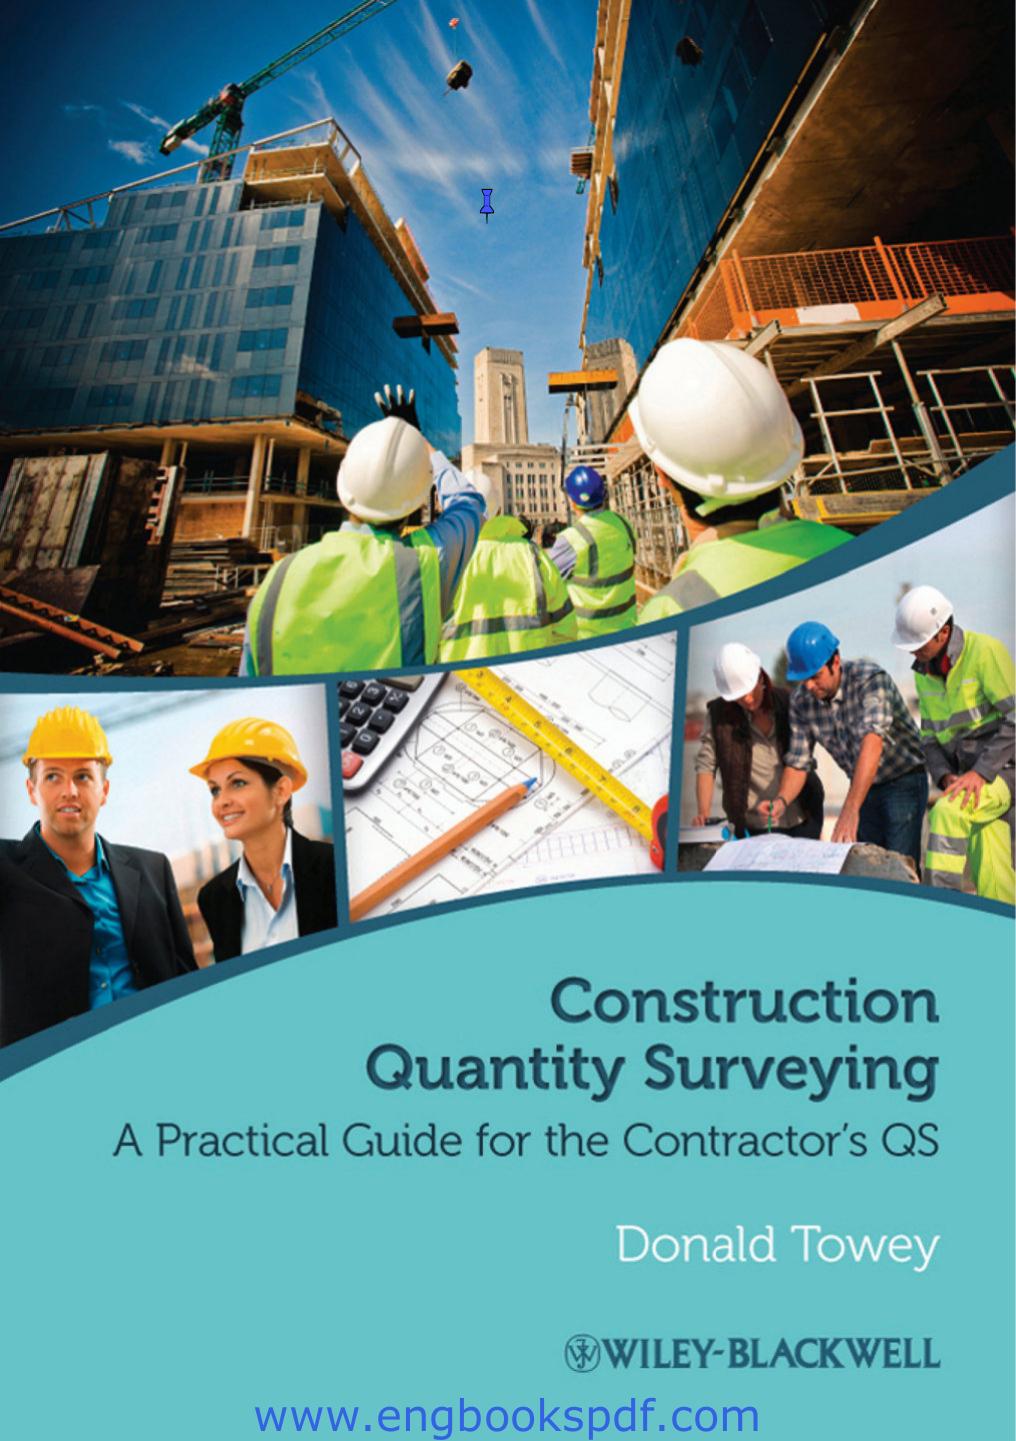 Construction Quantity Surveying: A Practical Guide for the Contractor’s QS